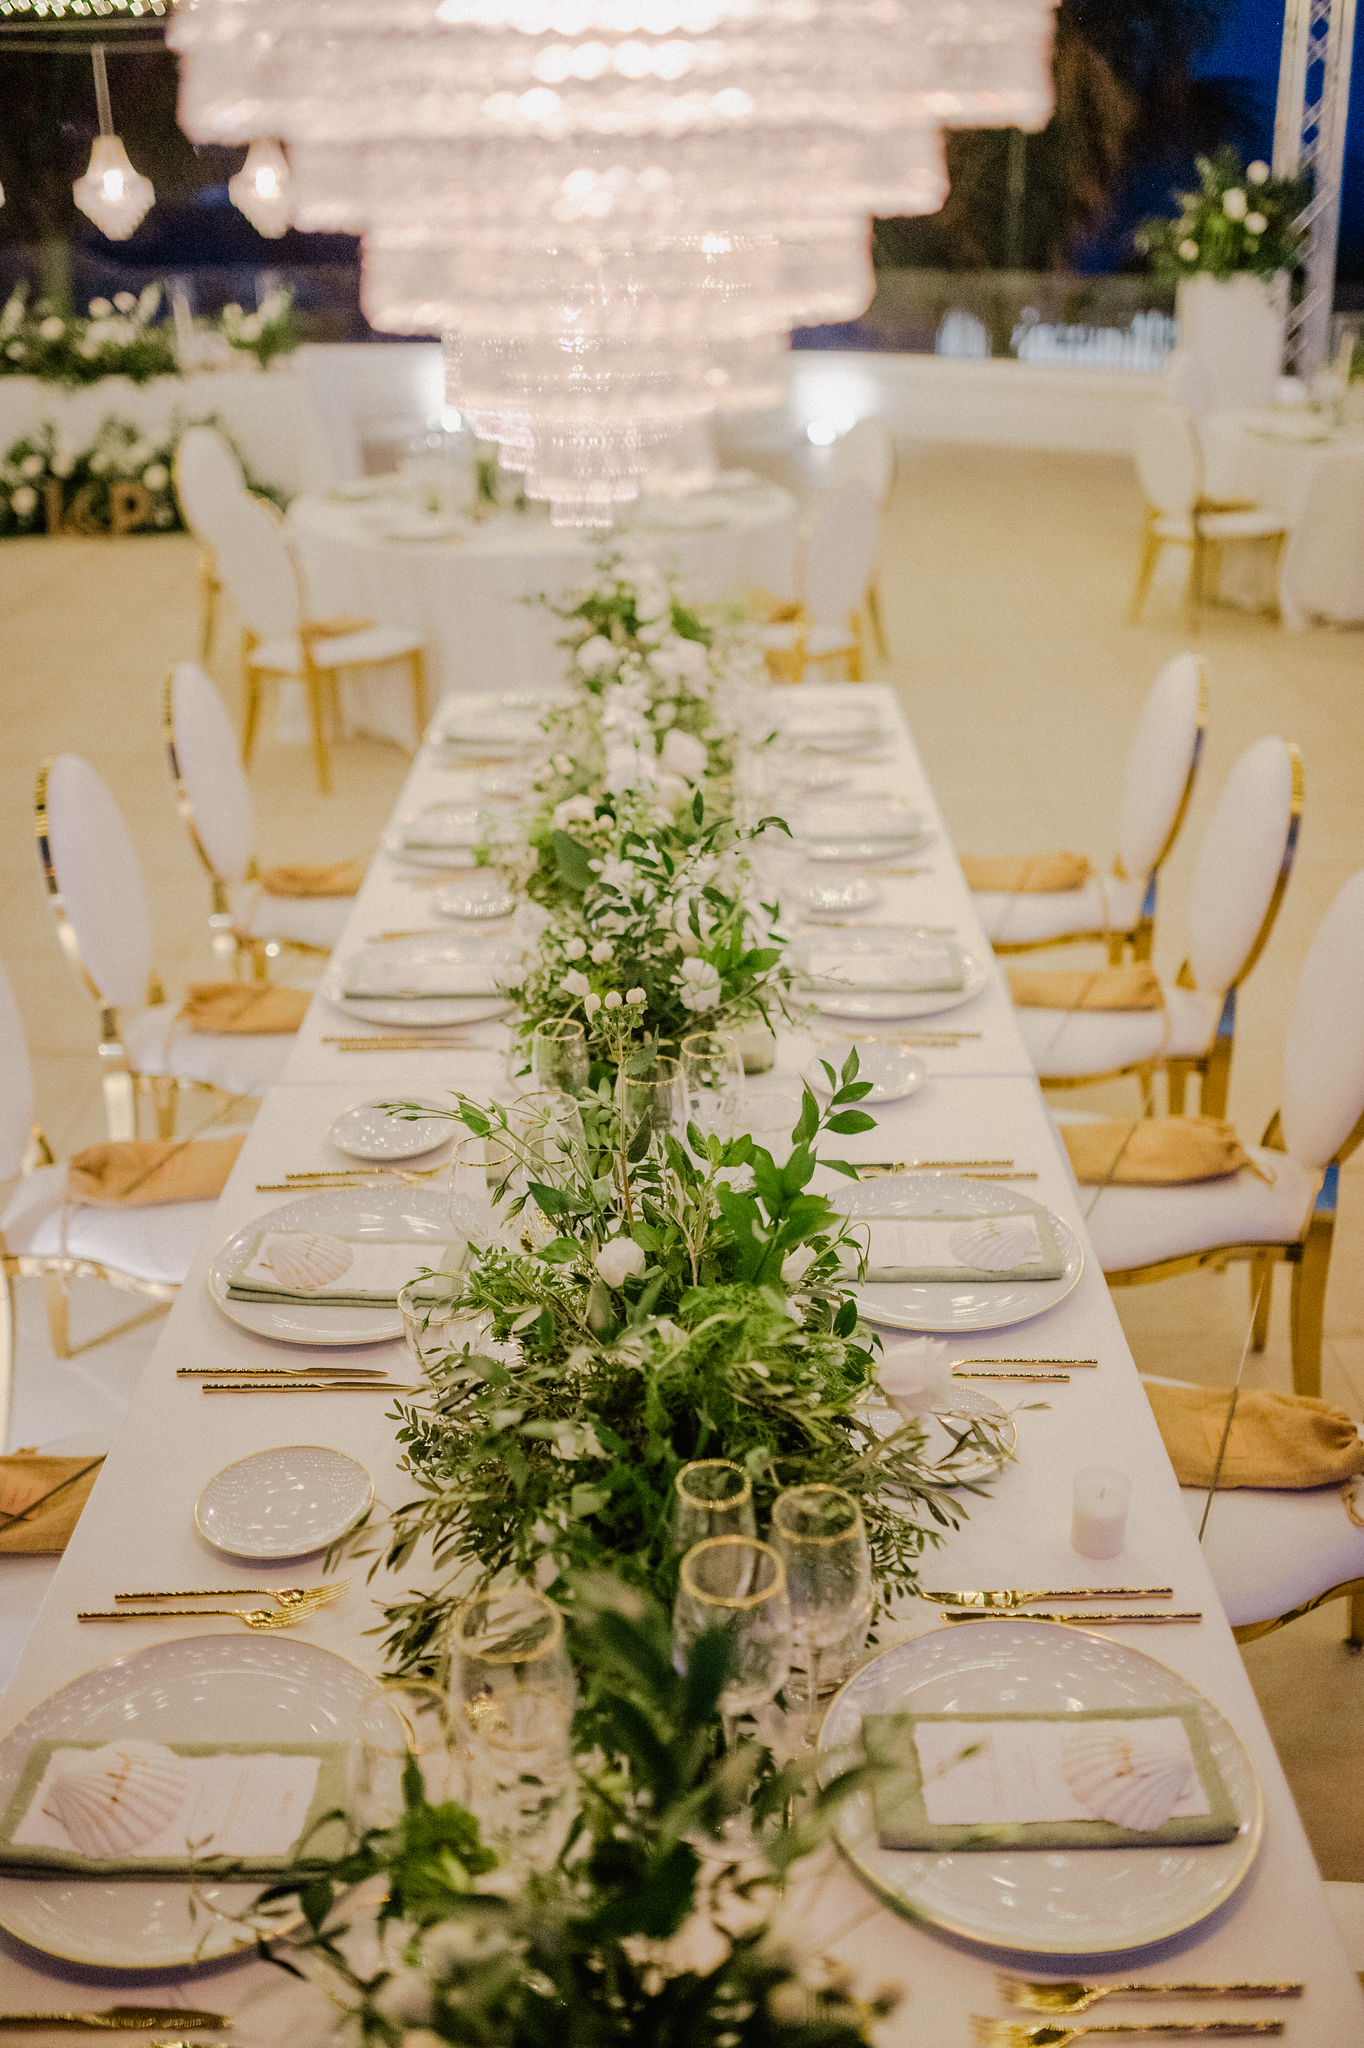 Elevating the Culinary Experience: Creative Cuisine for Weddings